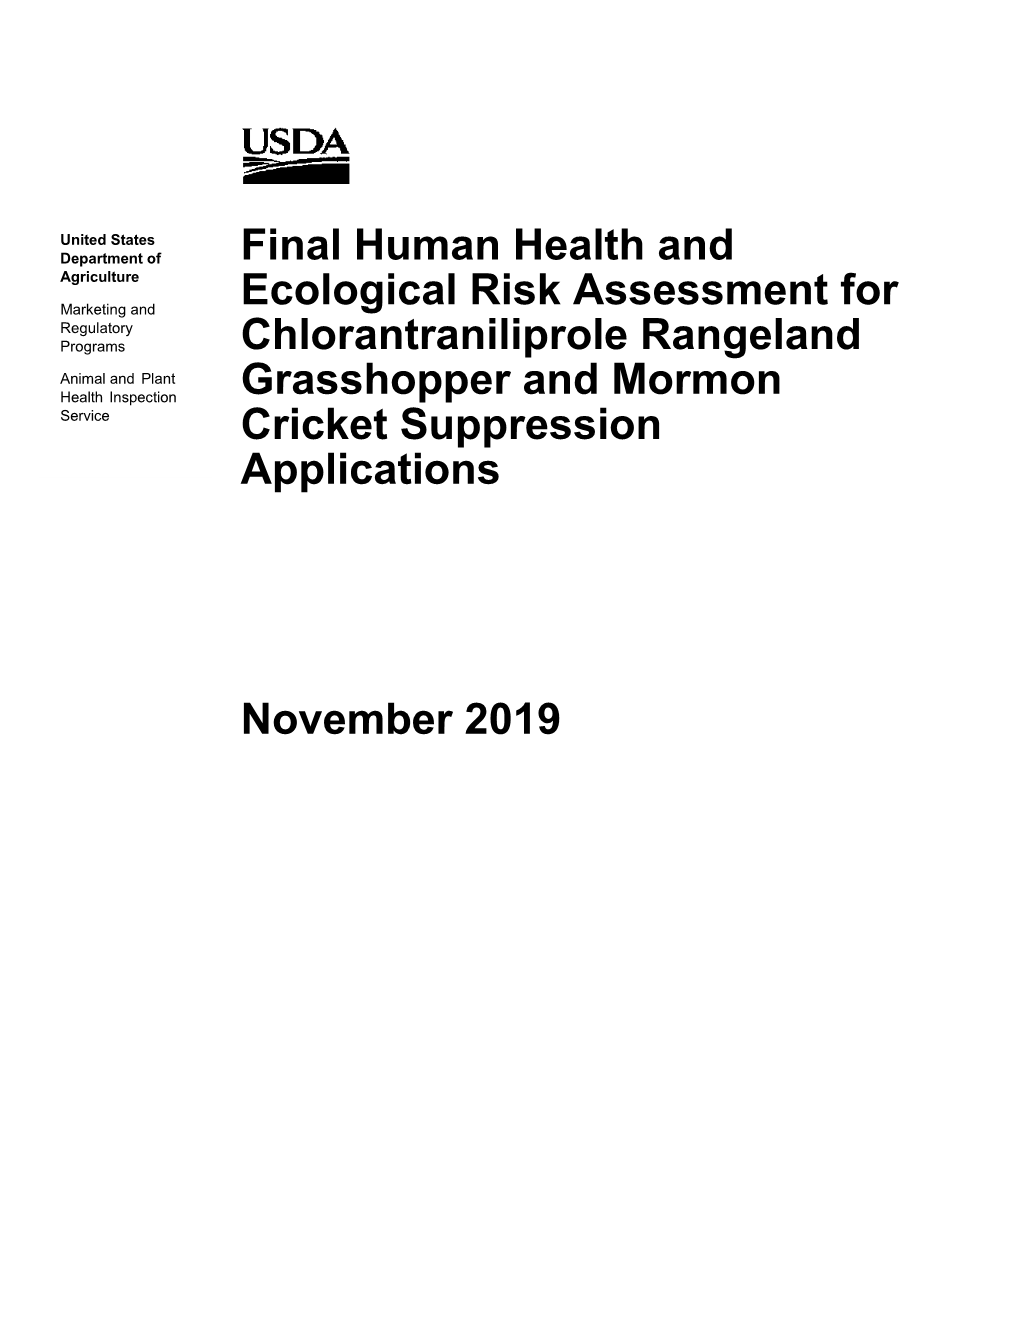 Final Human Health and Ecological Risk Assessment for Chlorantraniliprole Rangeland Grasshopper and Mormon Cricket Suppression Applications